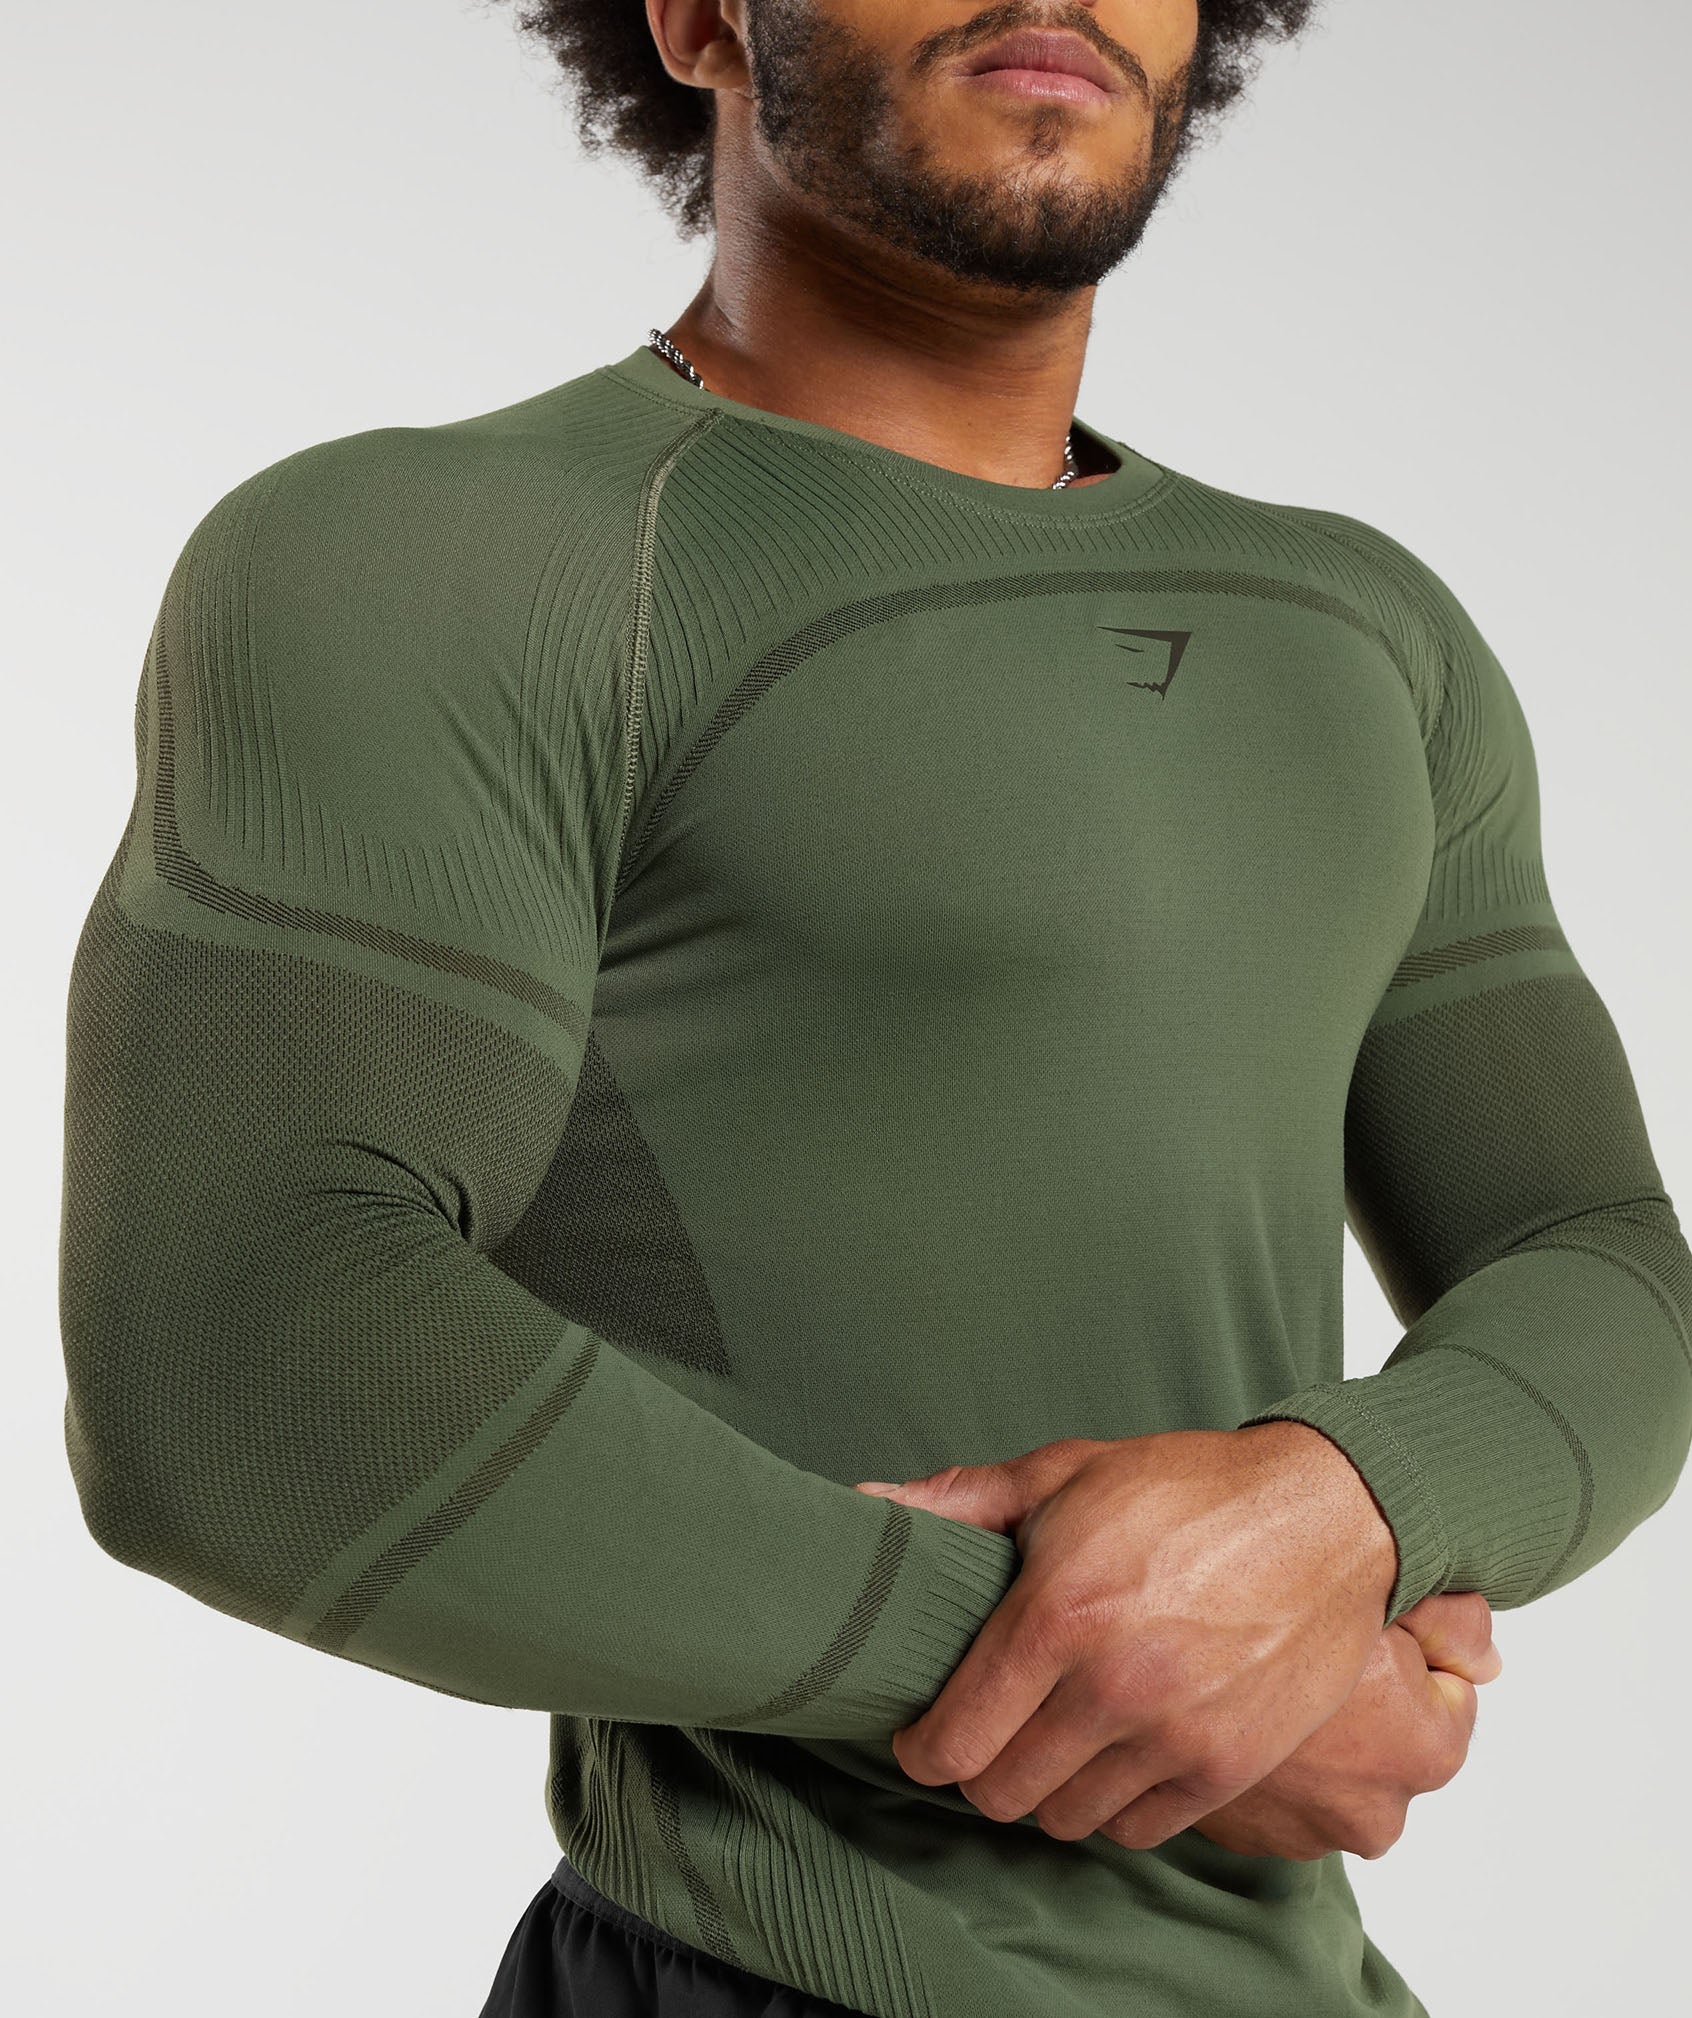 Gymshark Essential Long Sleeve T-Shirt - Core Olive